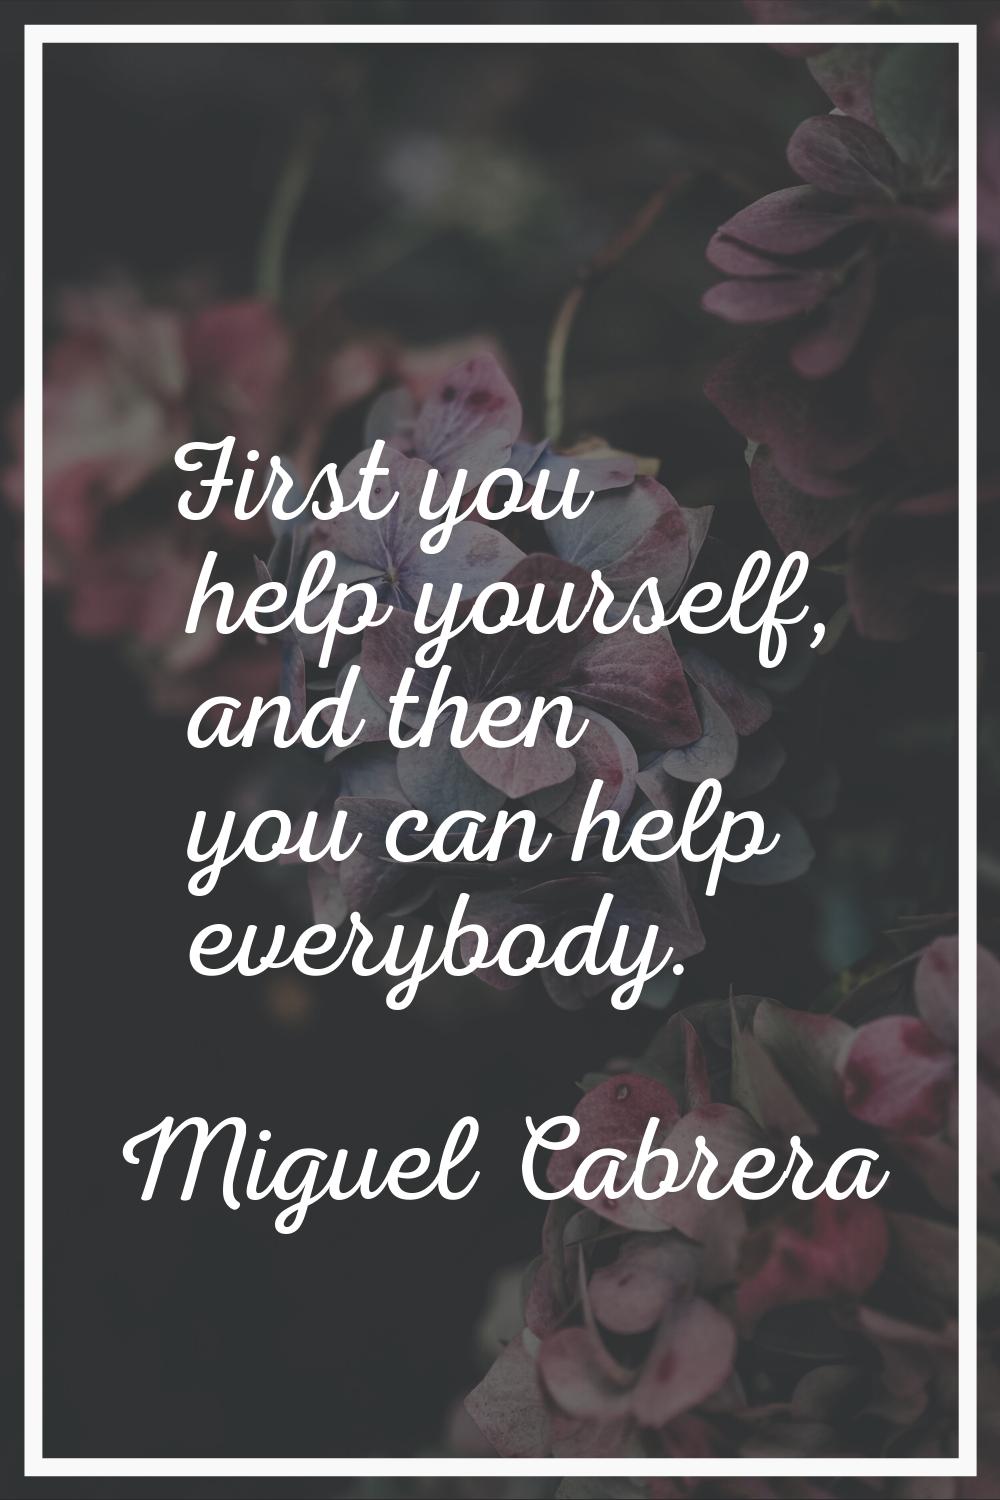 First you help yourself, and then you can help everybody.